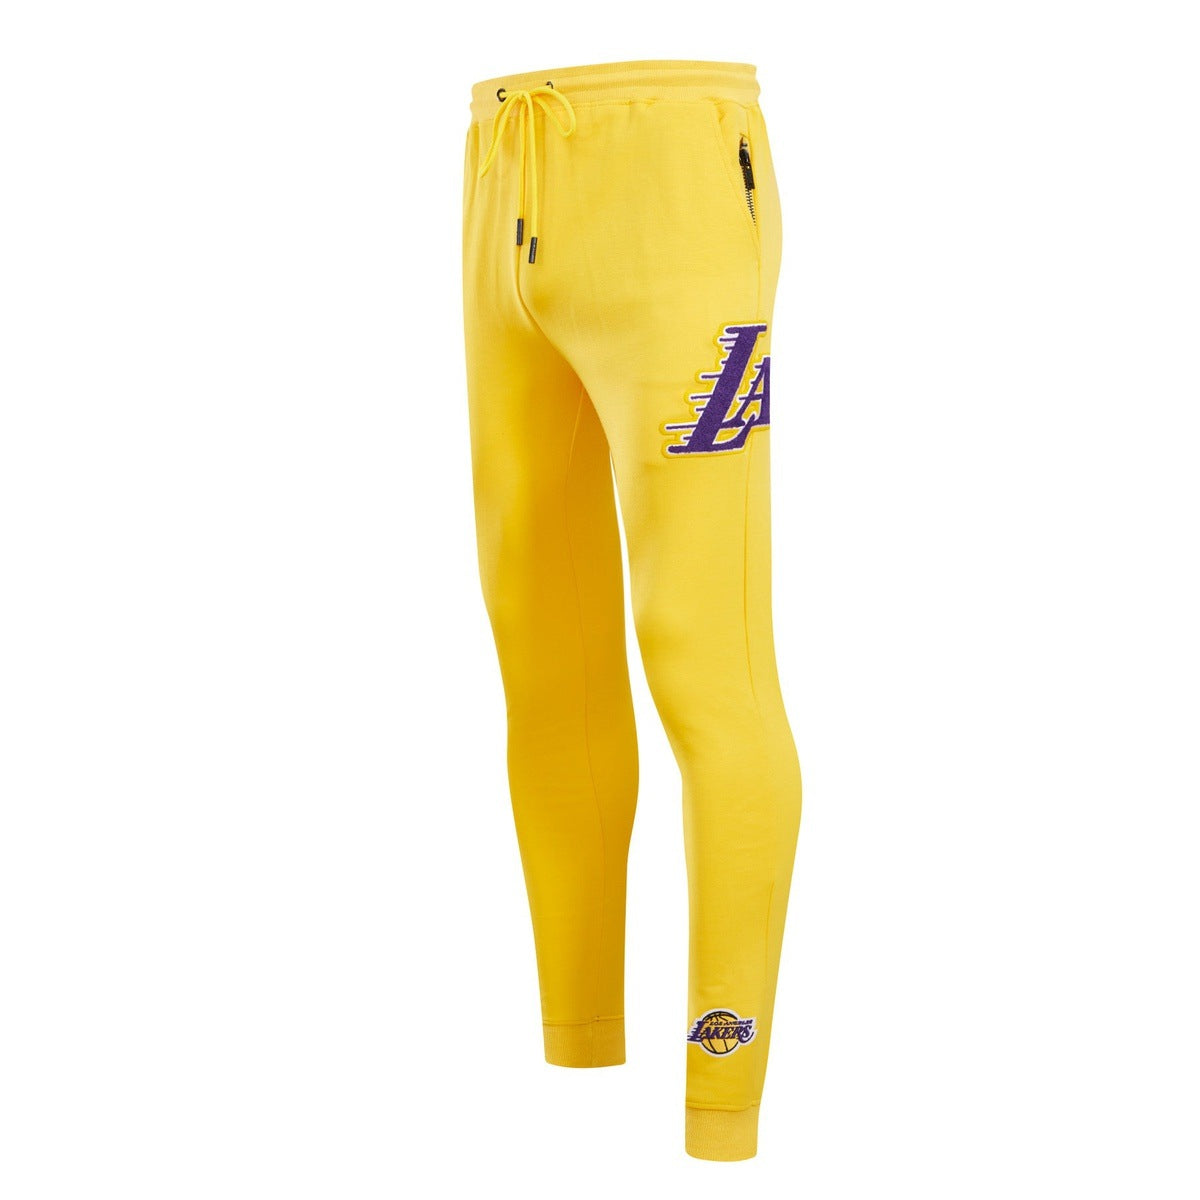 Yellow Track Pants - Buy Yellow Track Pants Online Starting at Just ₹220 |  Meesho